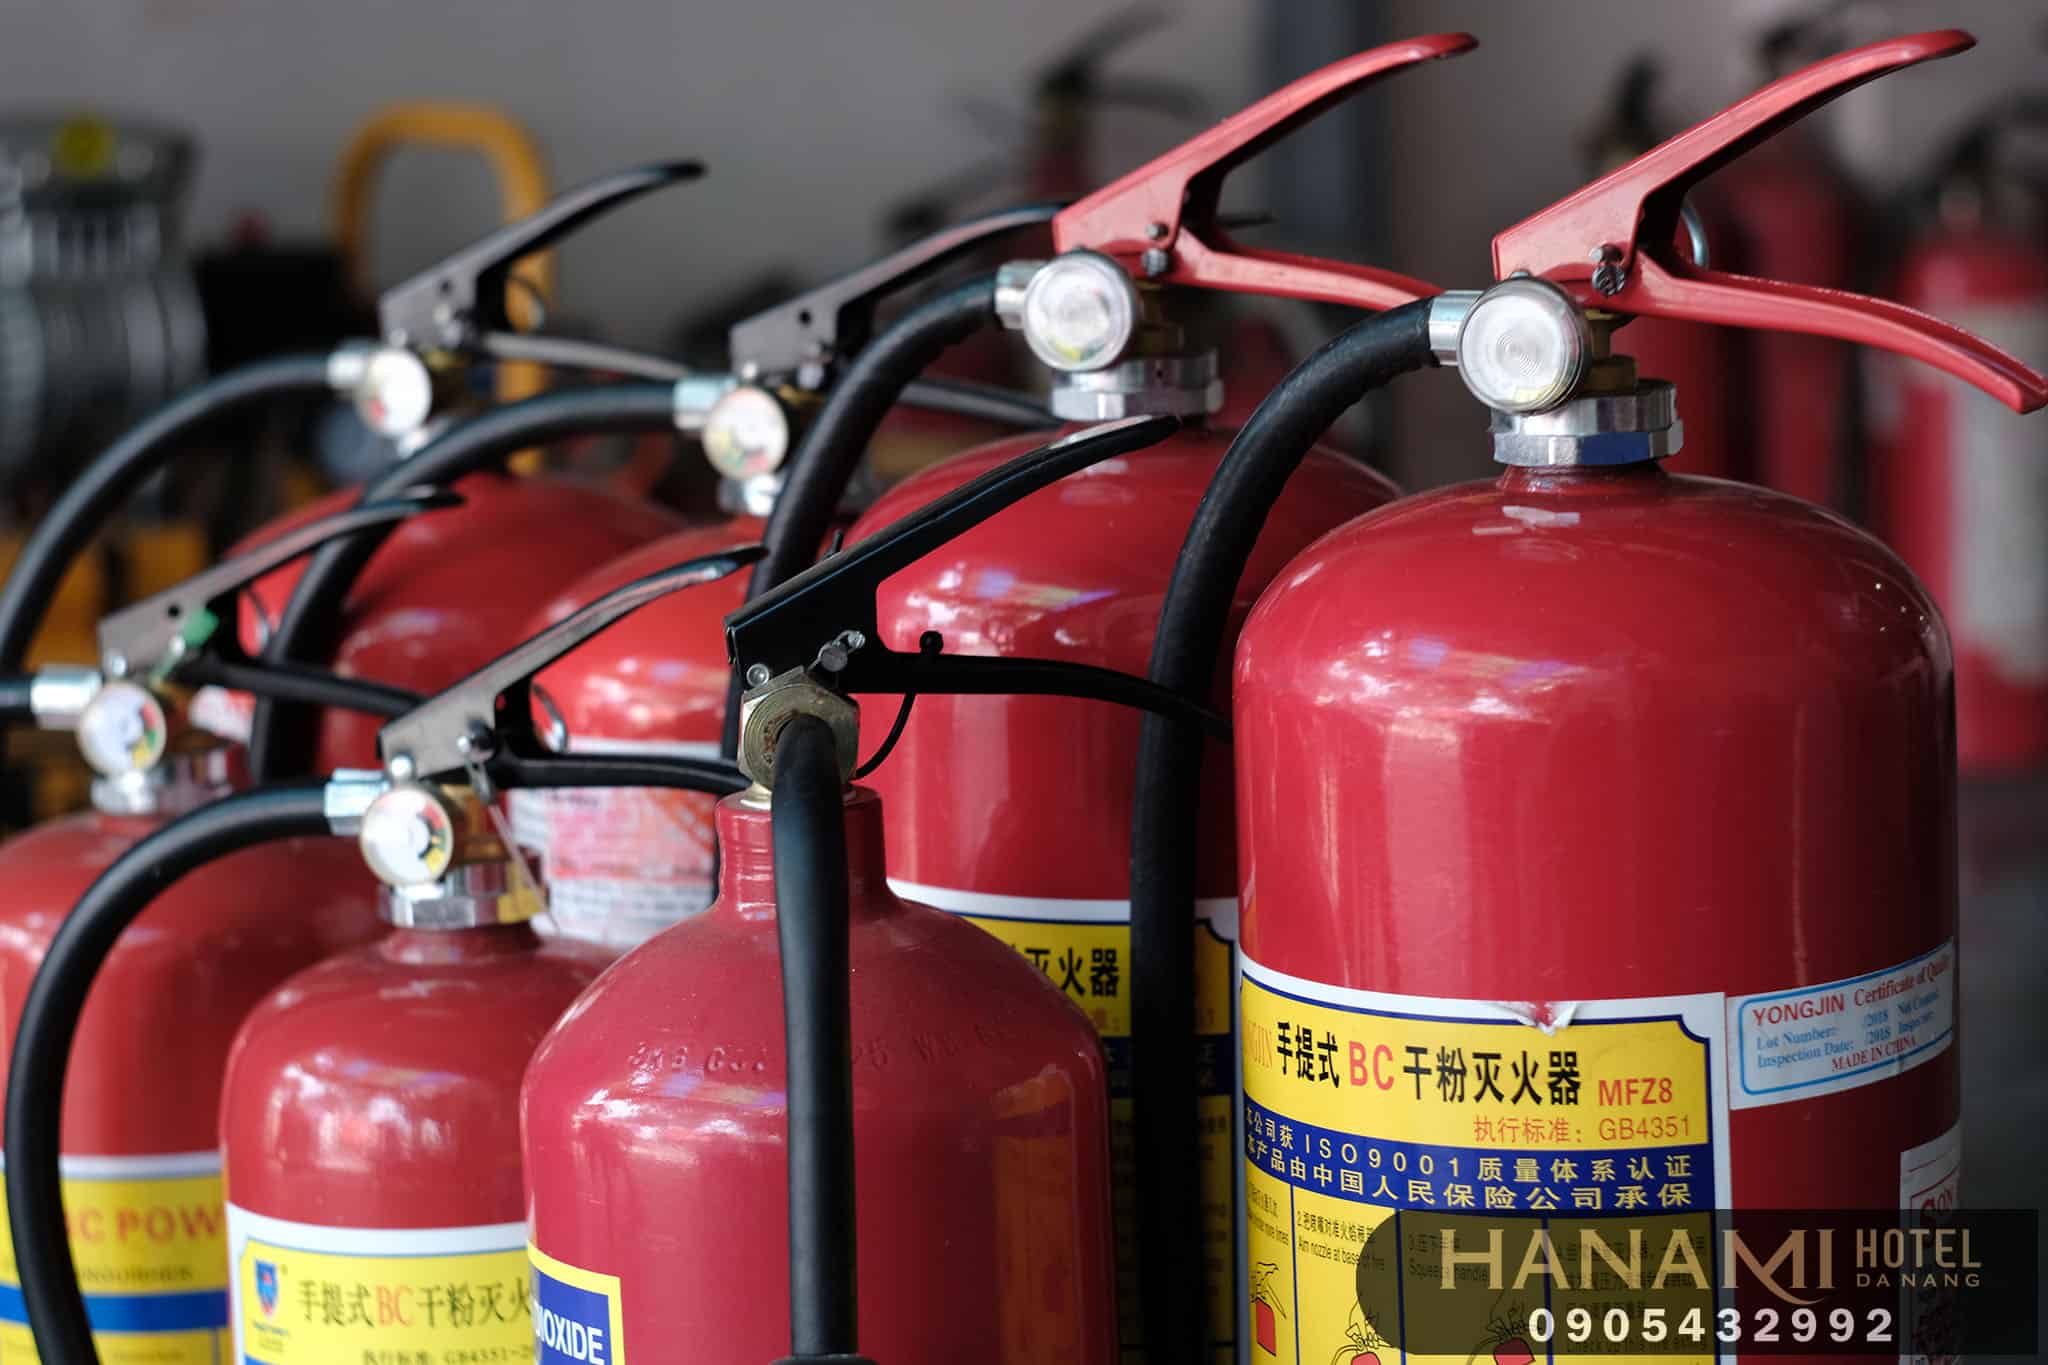 best places to buy fire extinguishers in da nang